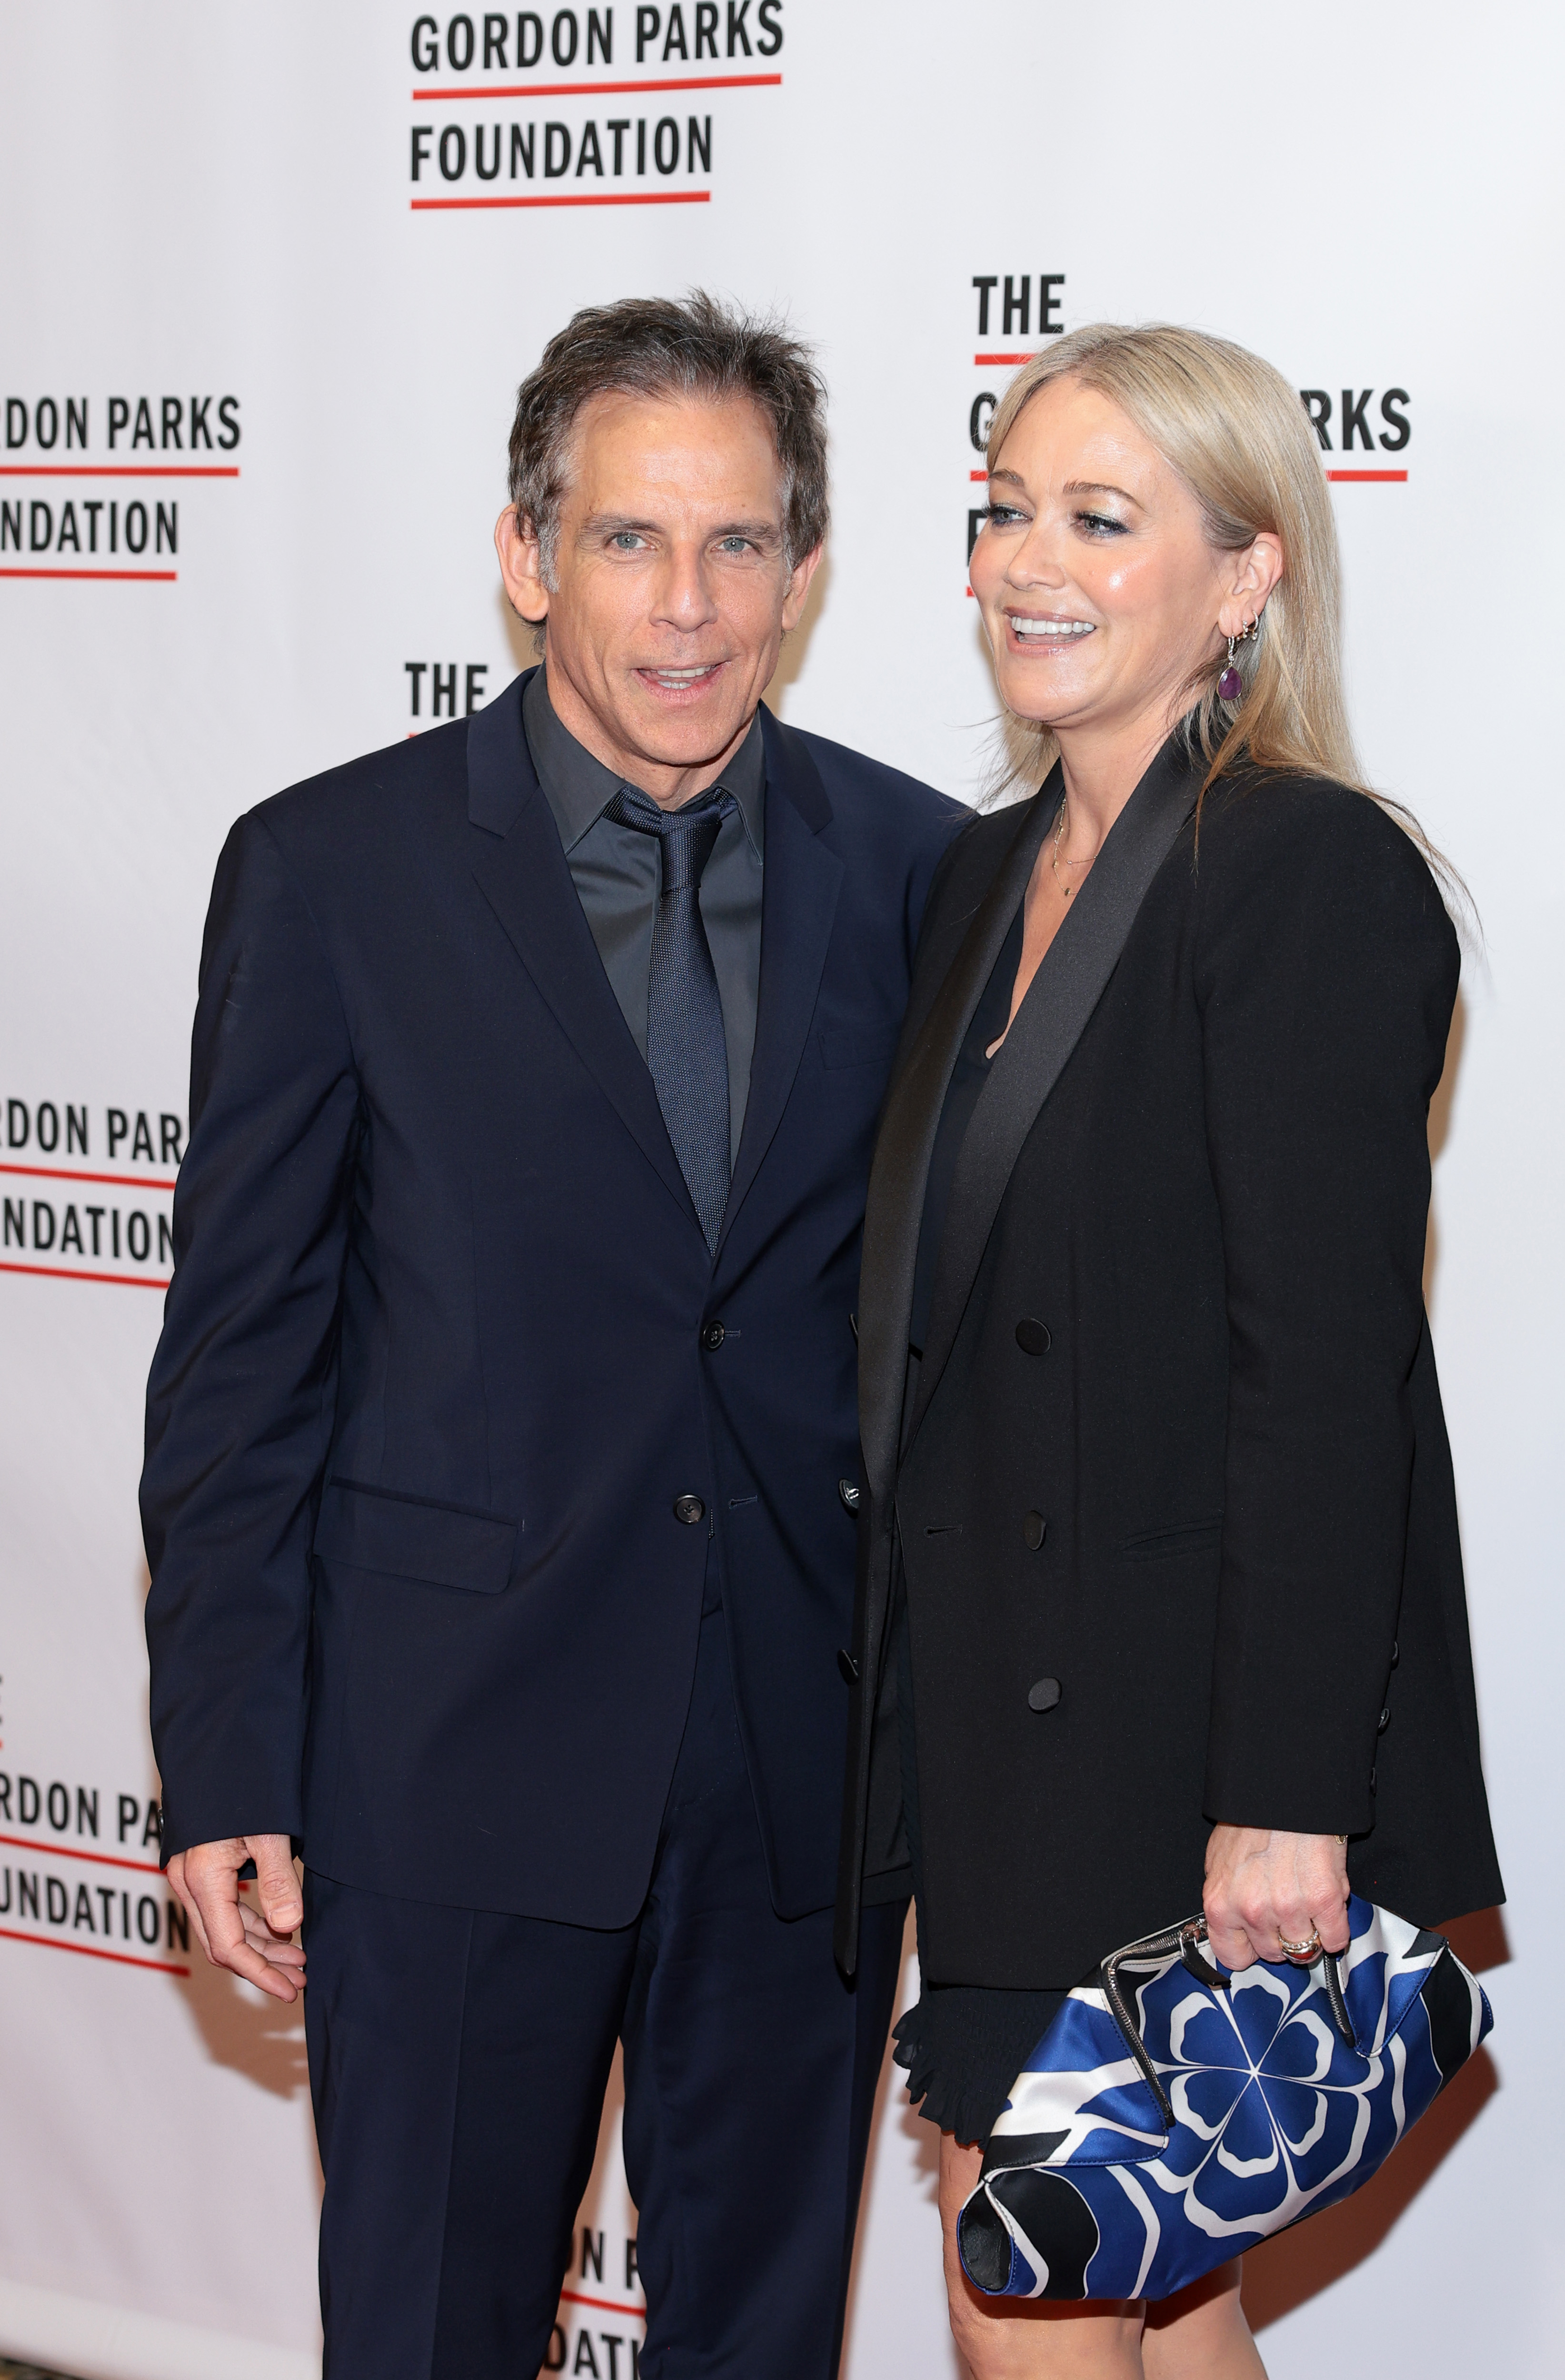 Ben and Christine are together after a rocky marriage